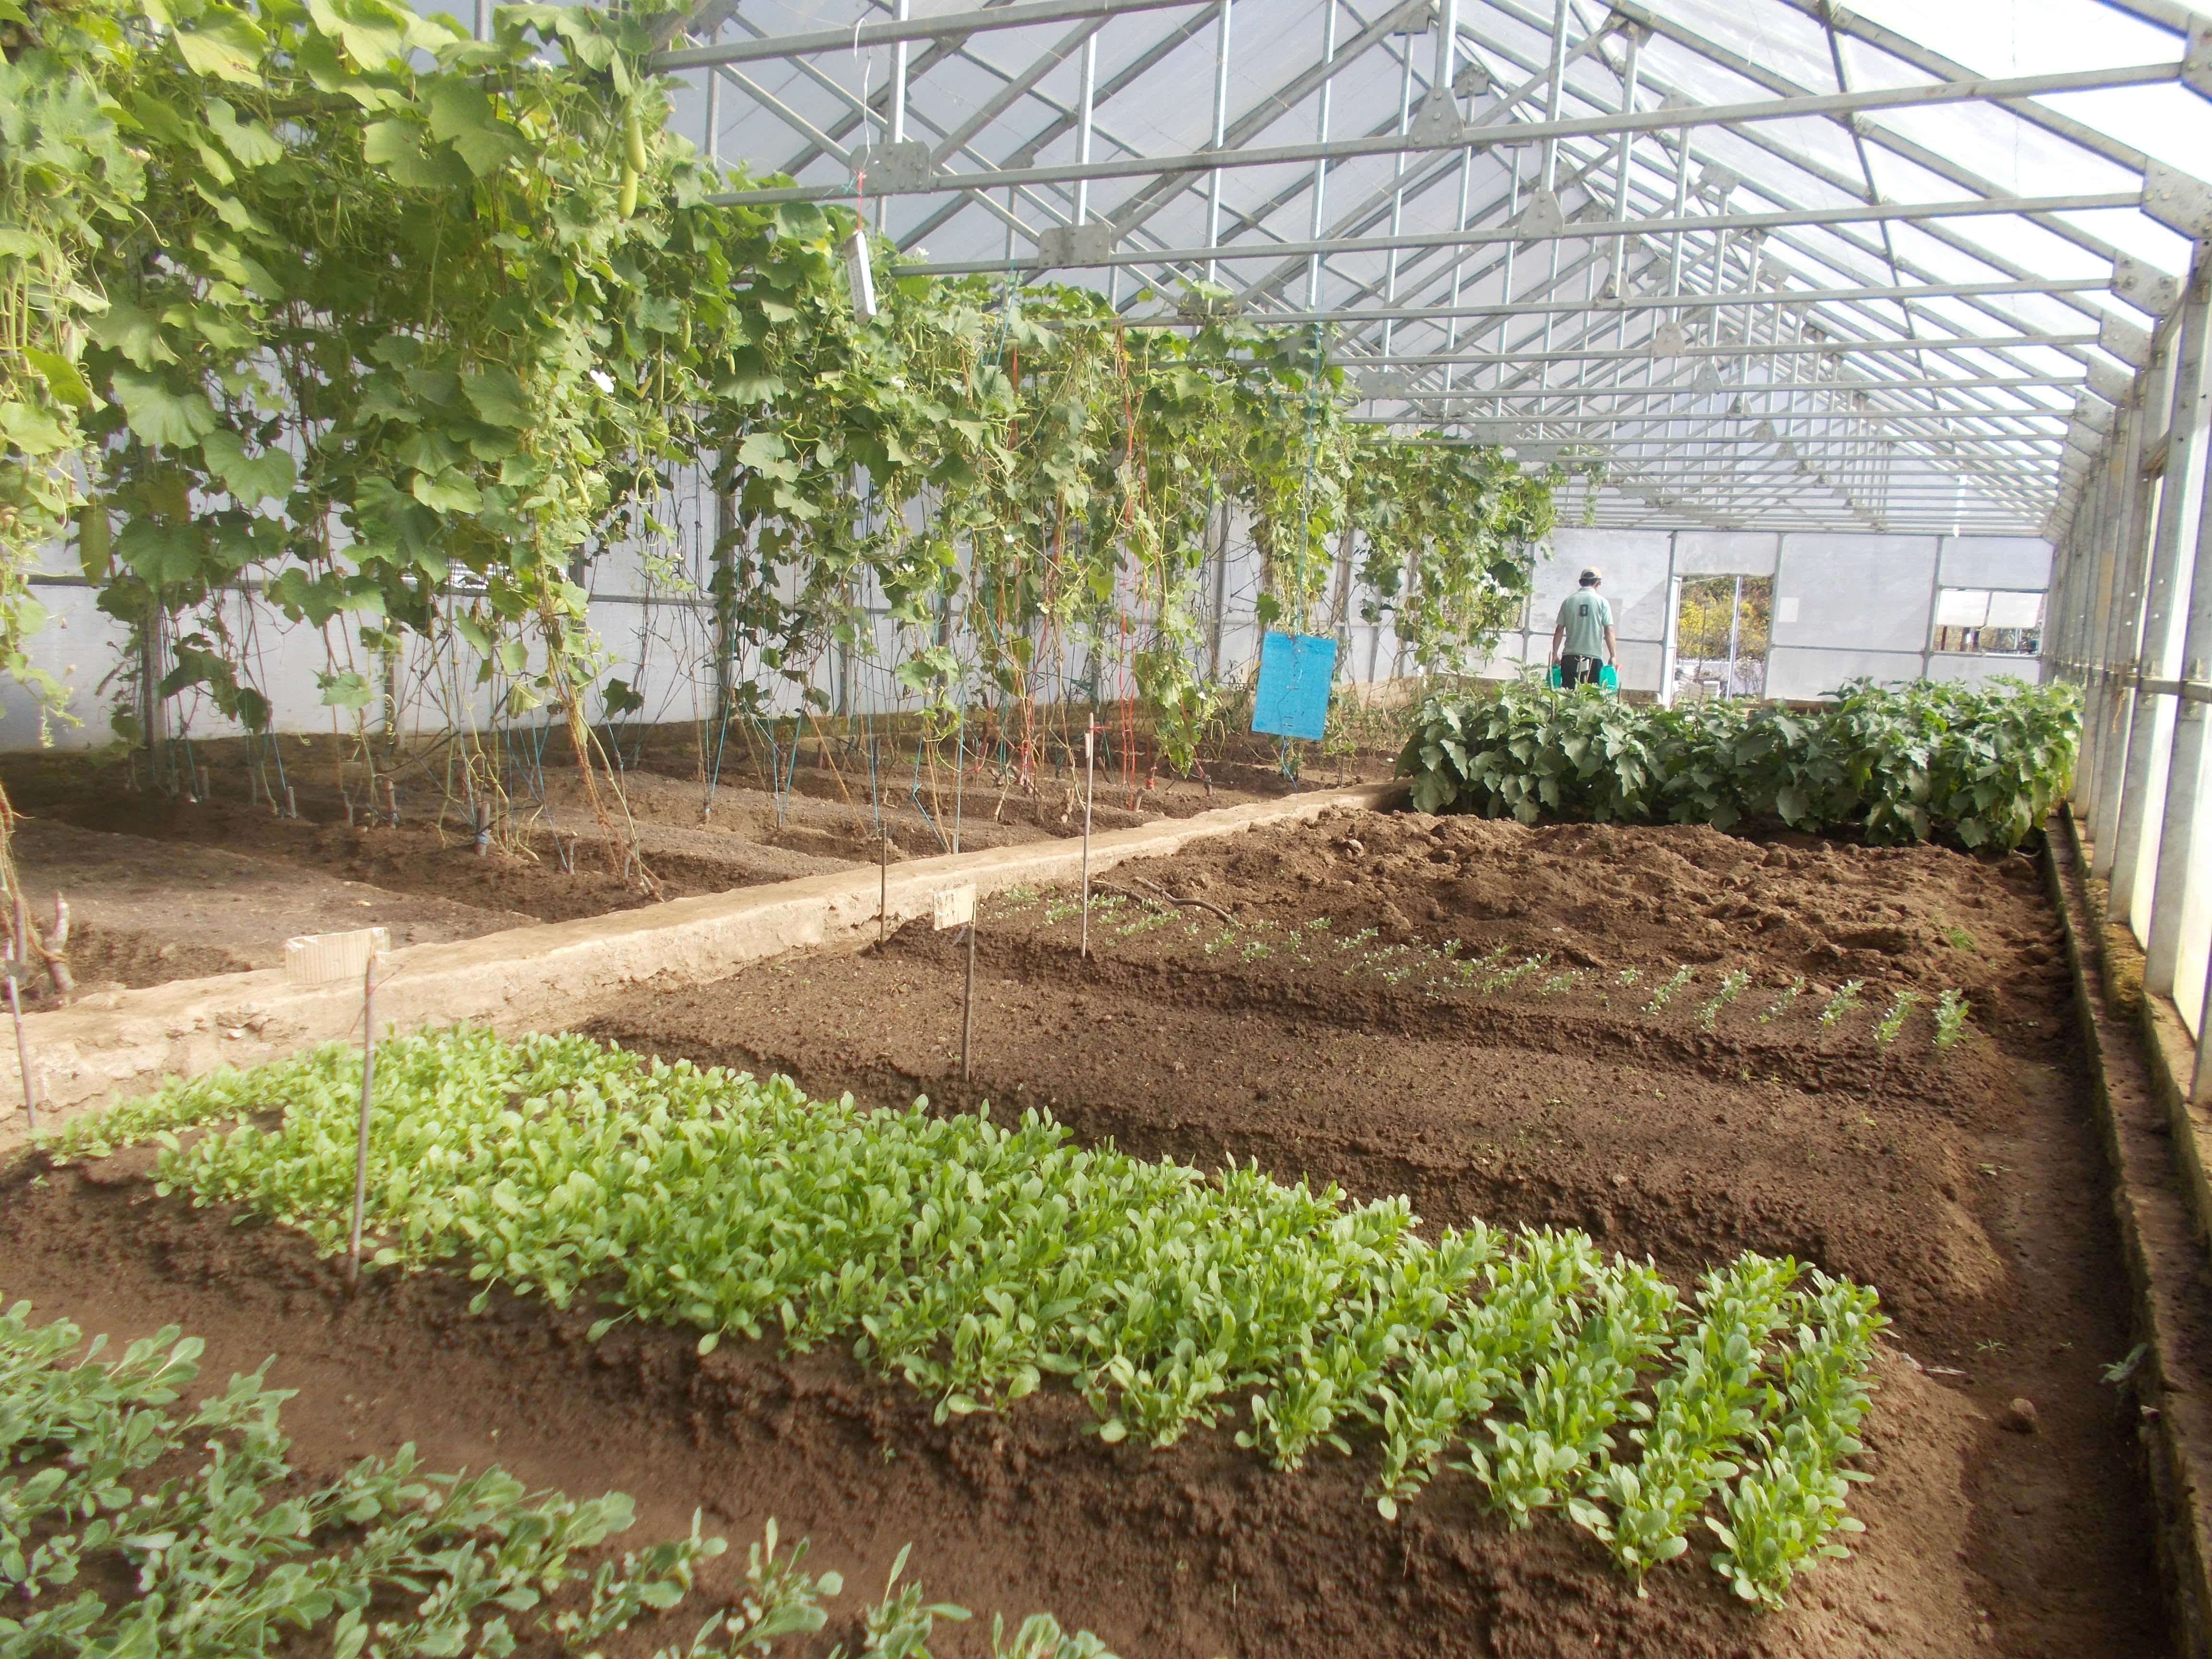 Protected cultivation technologies for vegetables in high altitude areas